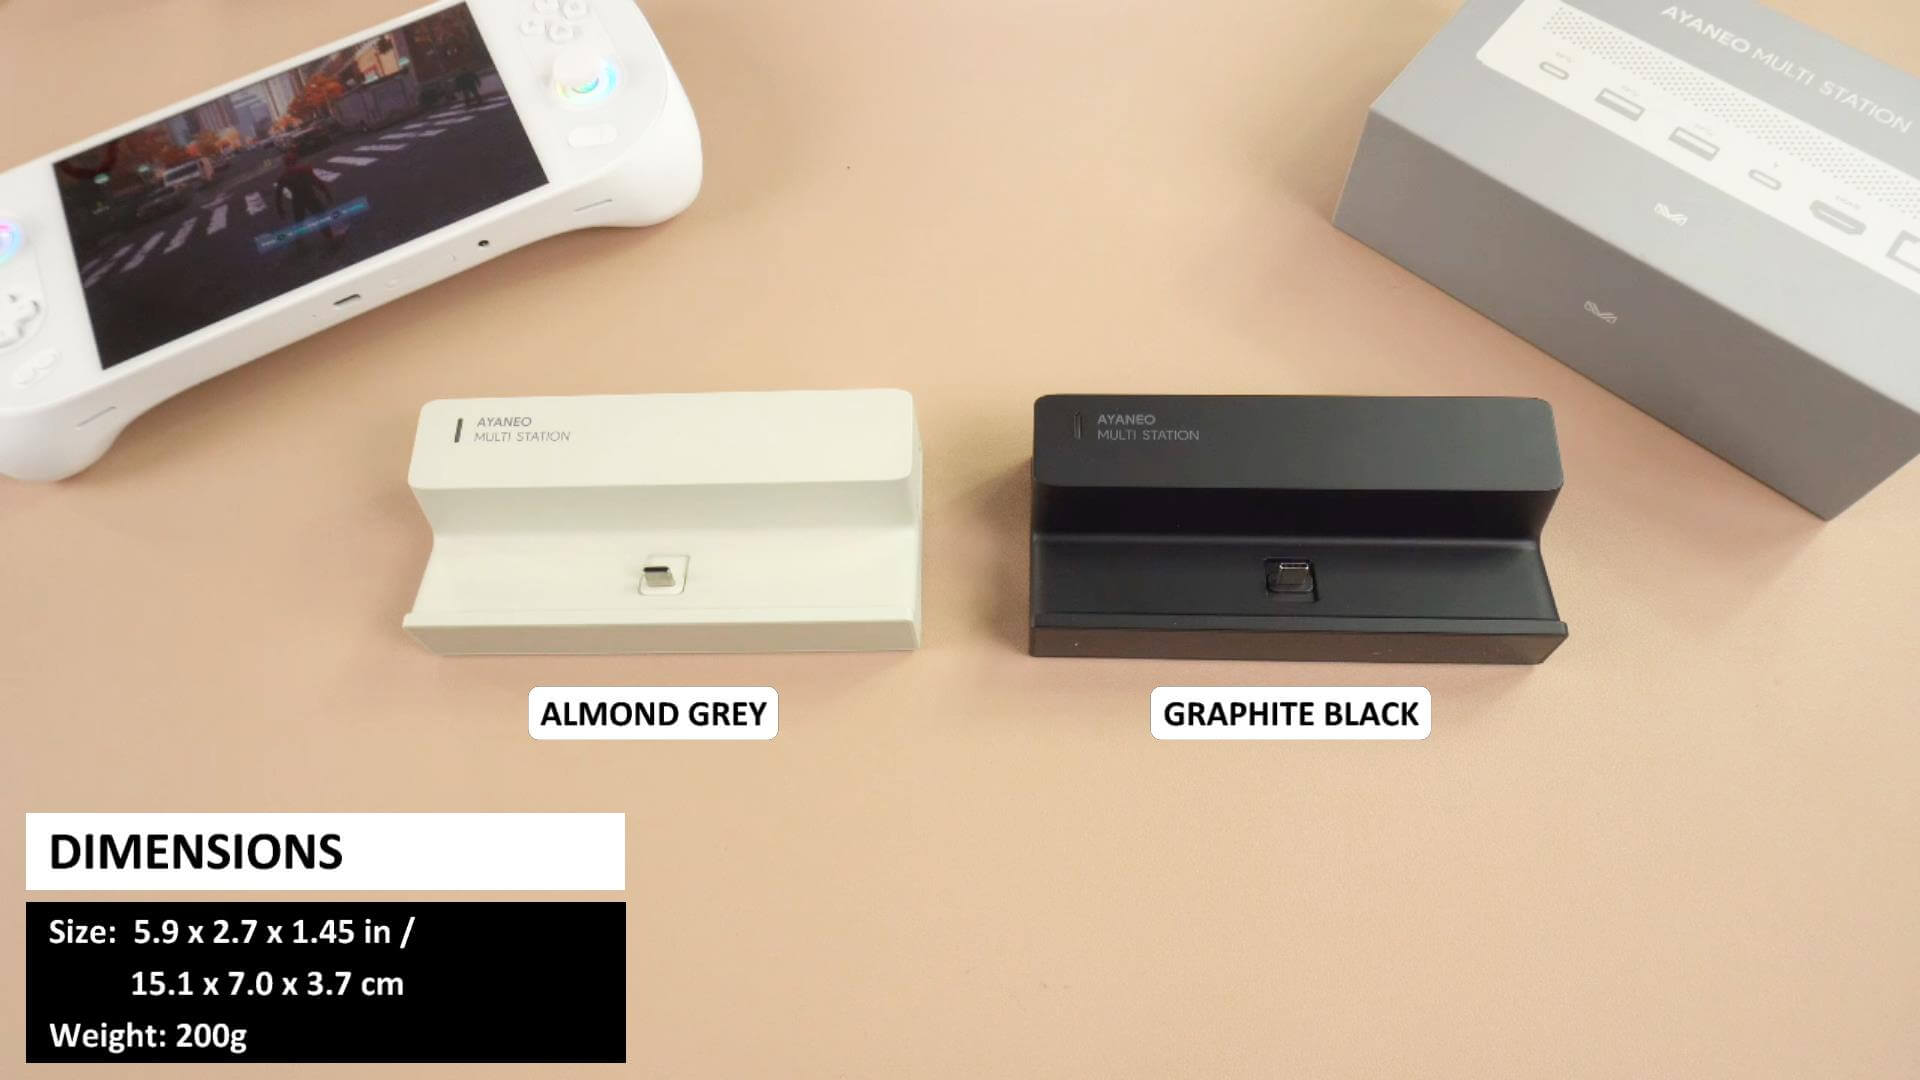 AYANEO Docking Station Review - Expand your AYANEO handheld gaming